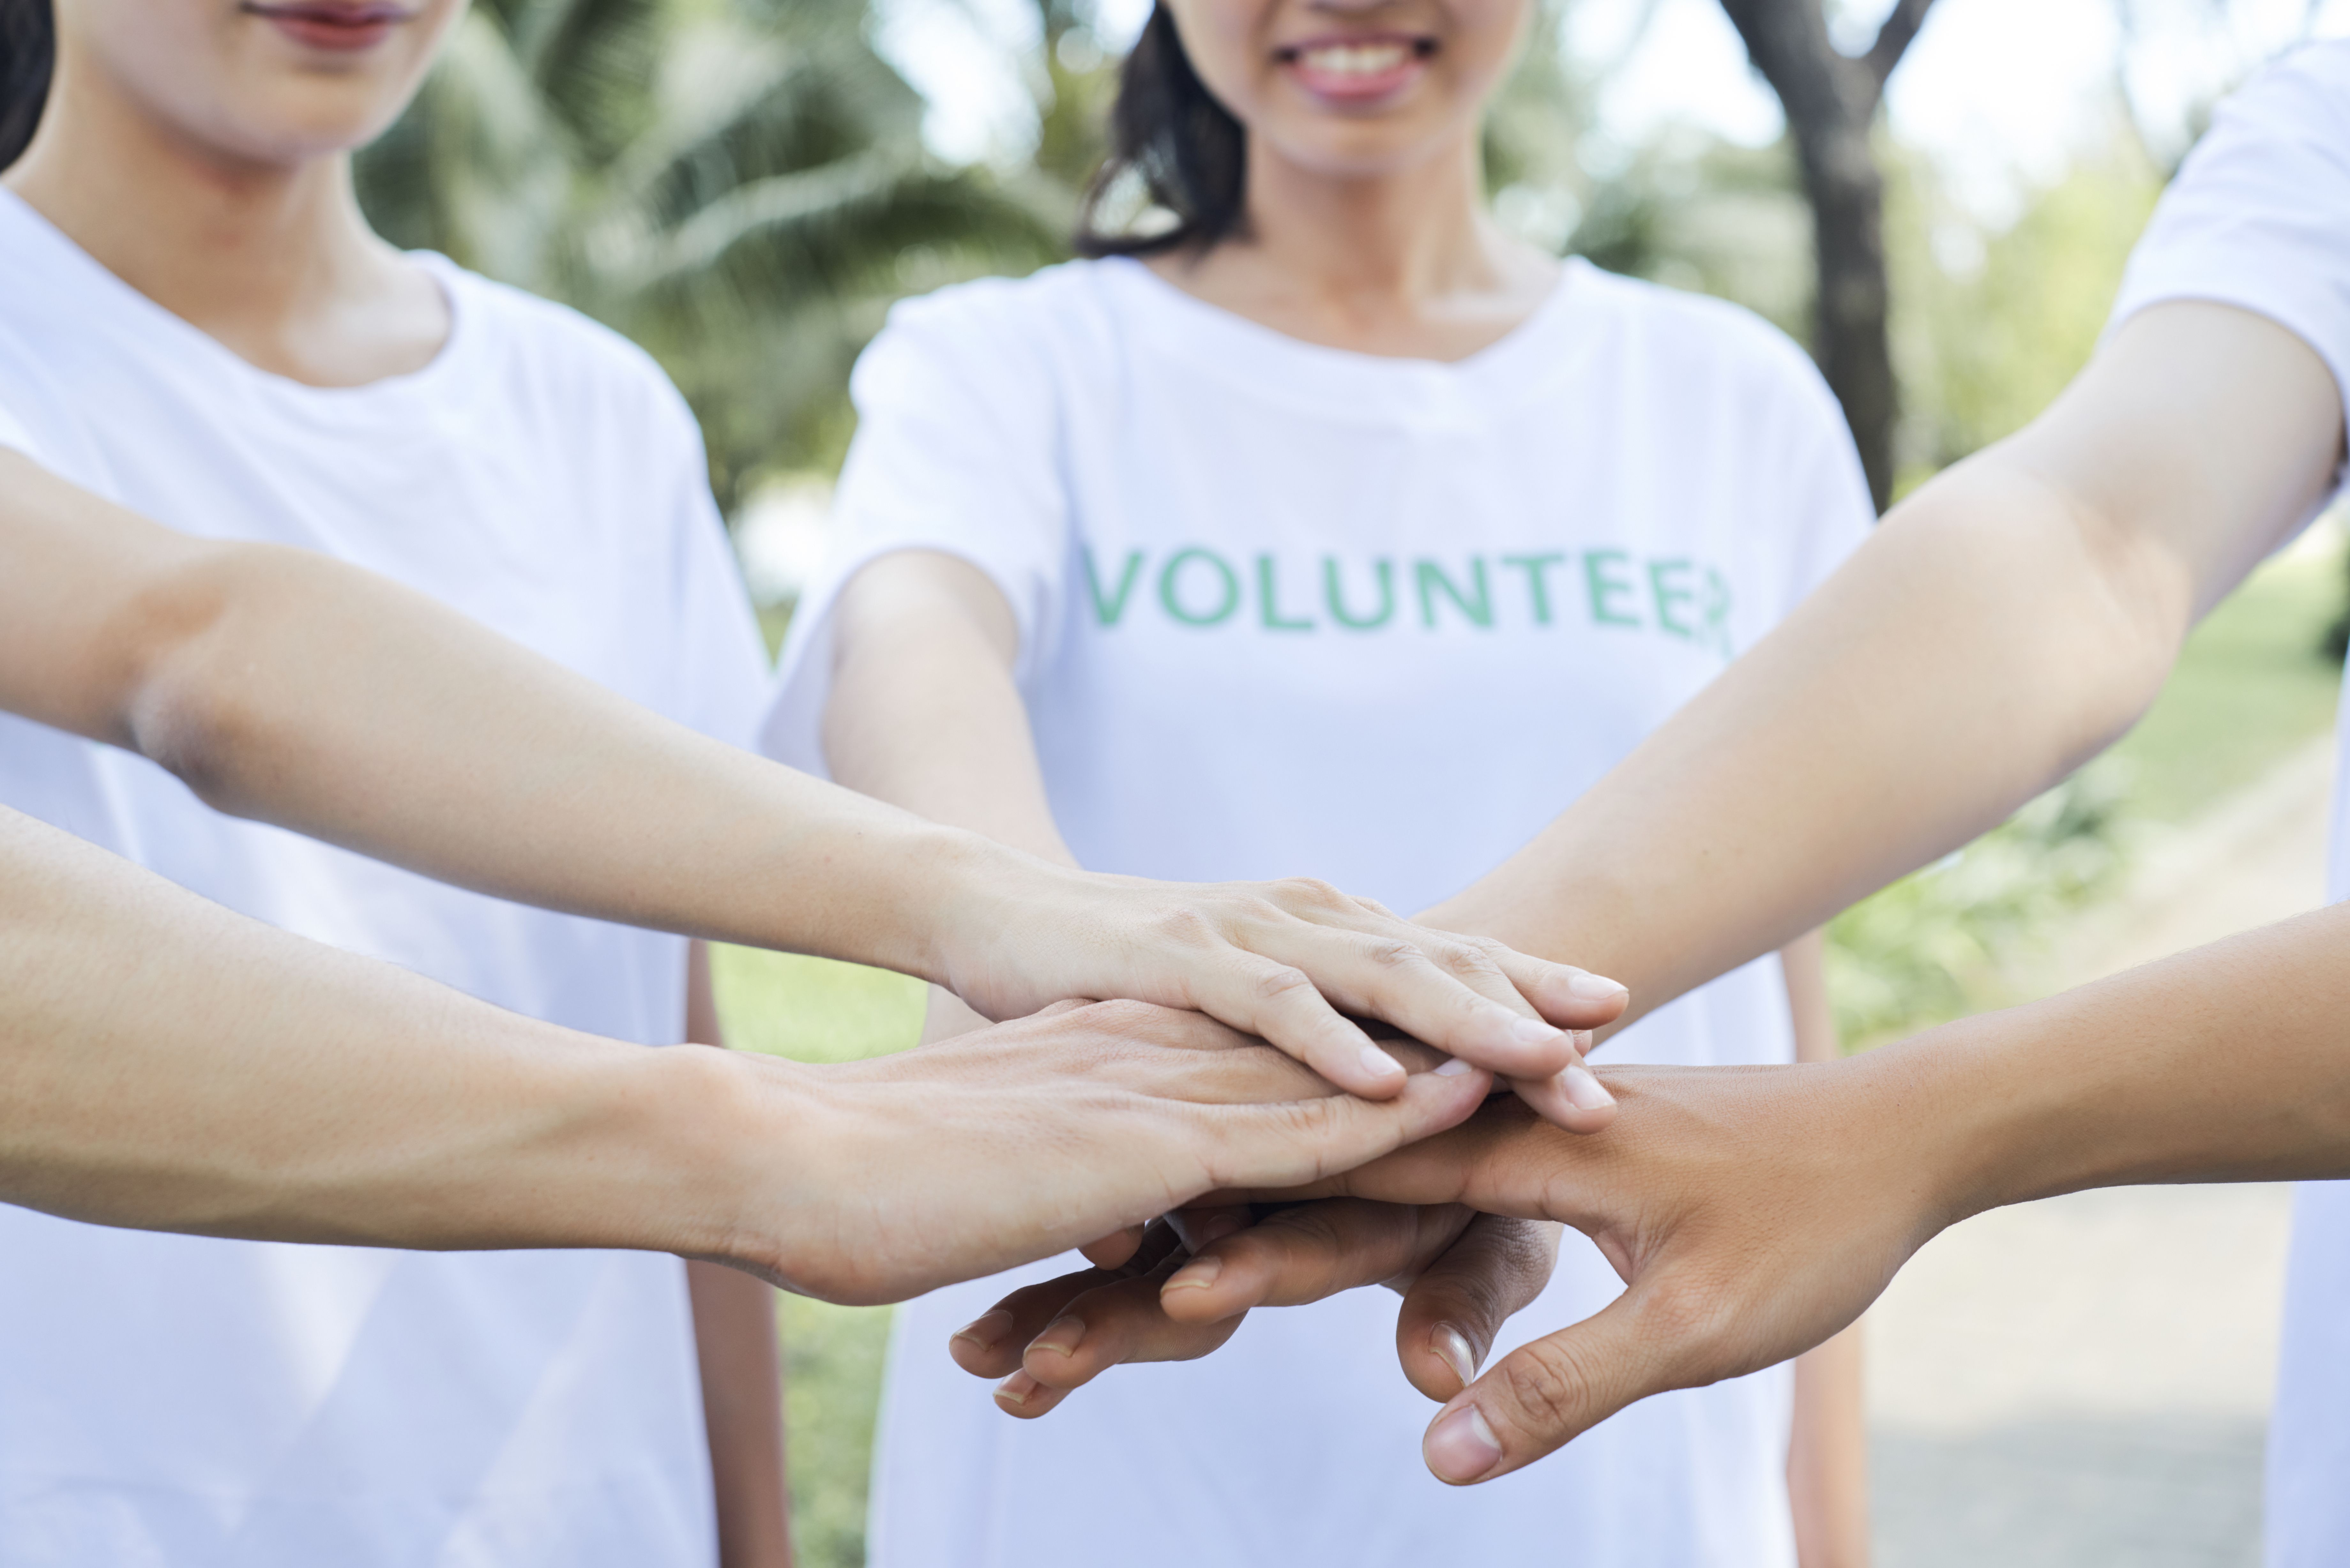 Diverse group of people holding their hands together, one wearing a VOLUNTEER t-shirt, representing teamwork and collaboration